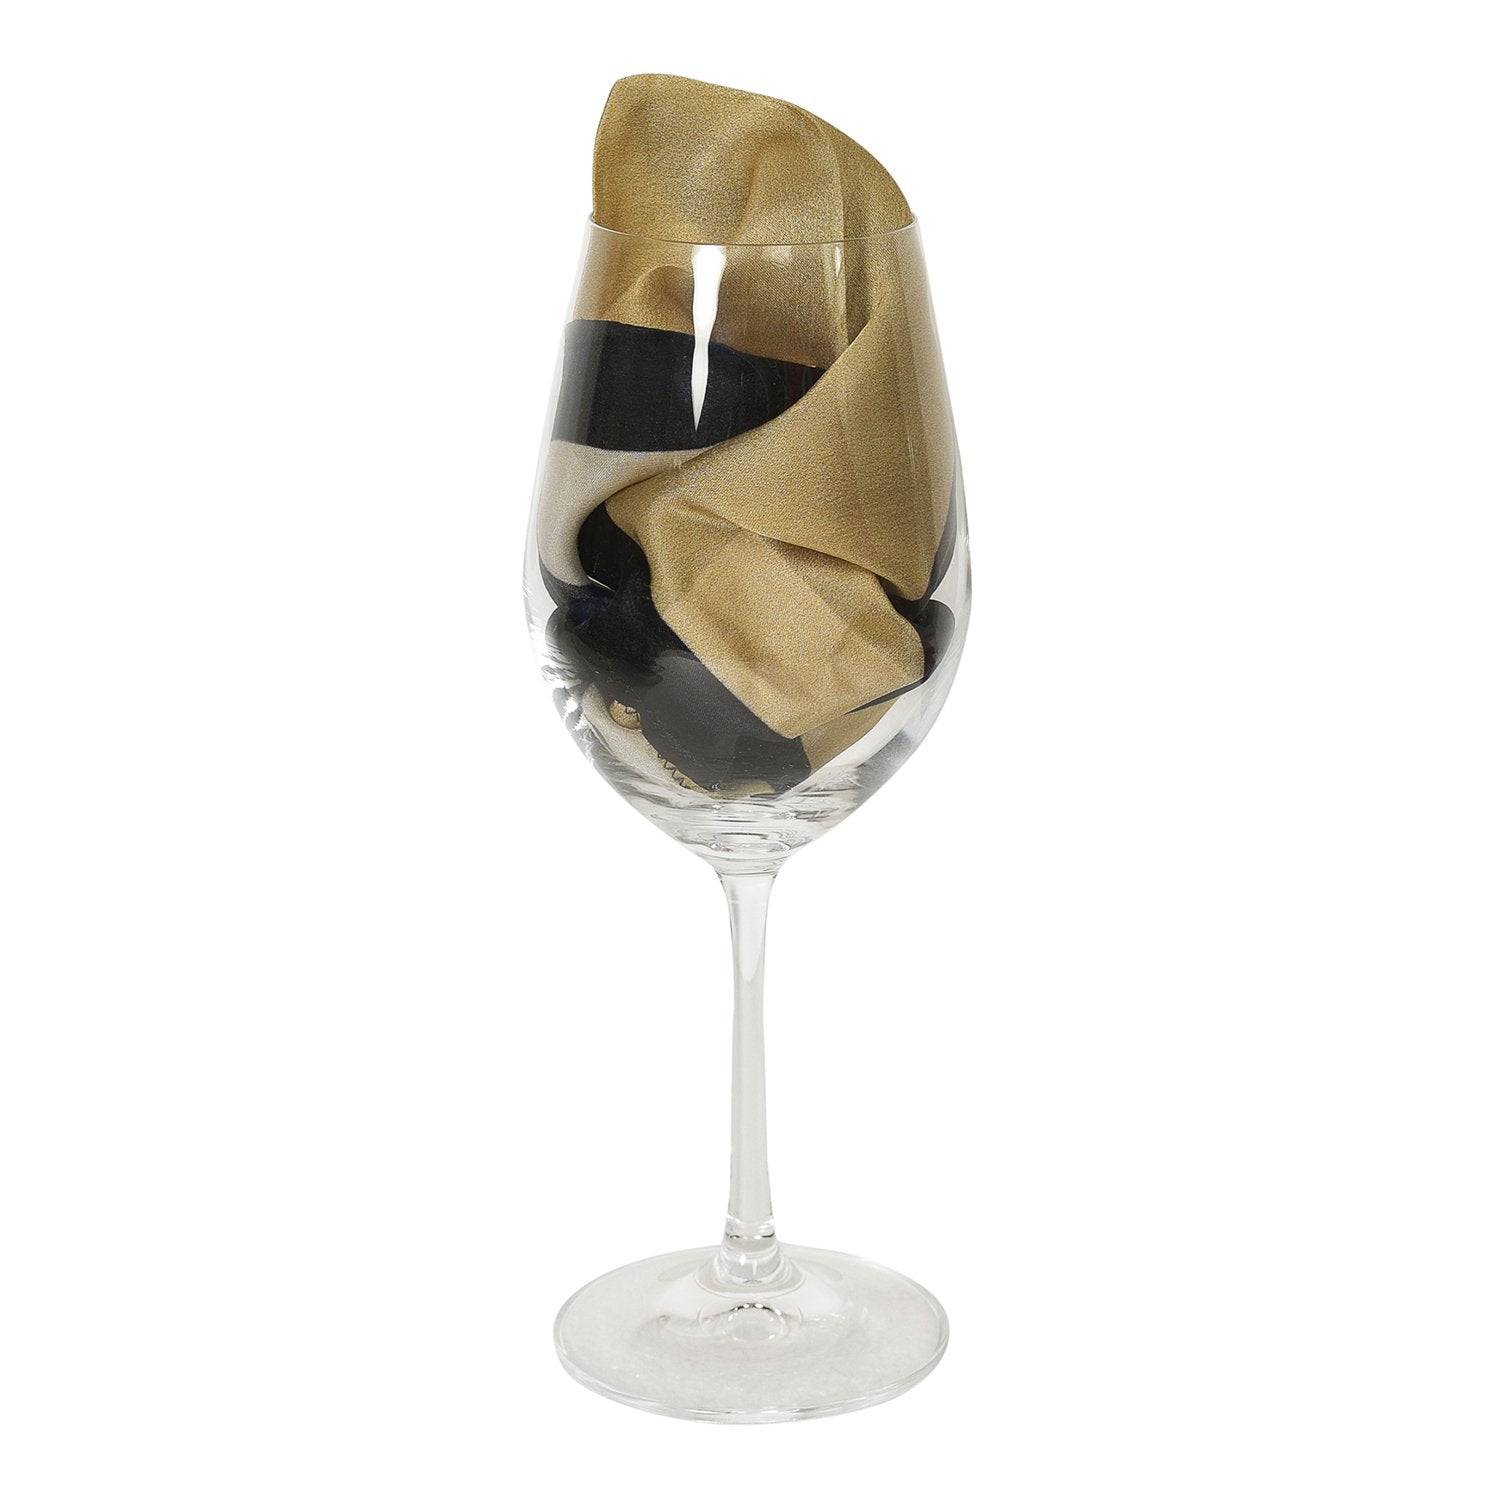 Chokore 2-in-1 Beige & Black Silk Pocket Square from the Solids Line